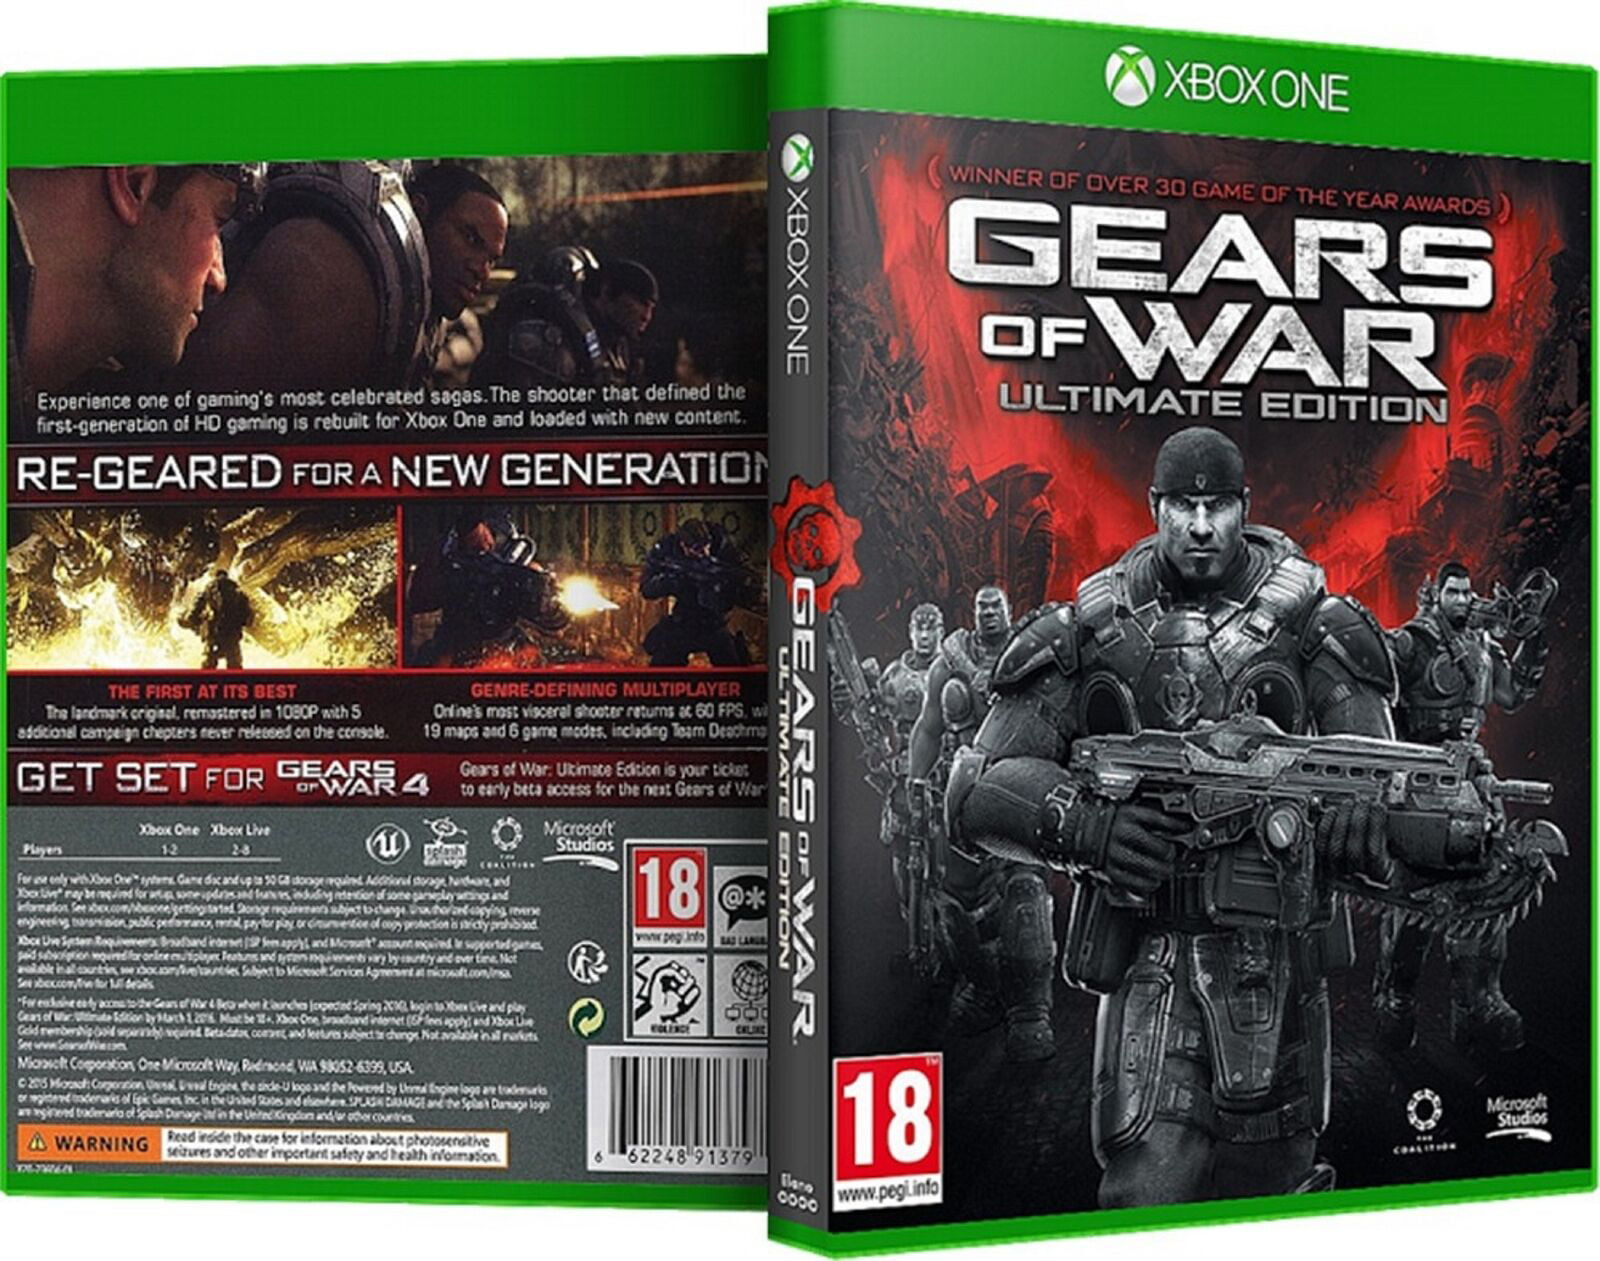 can i download gears of war 4 from the disc